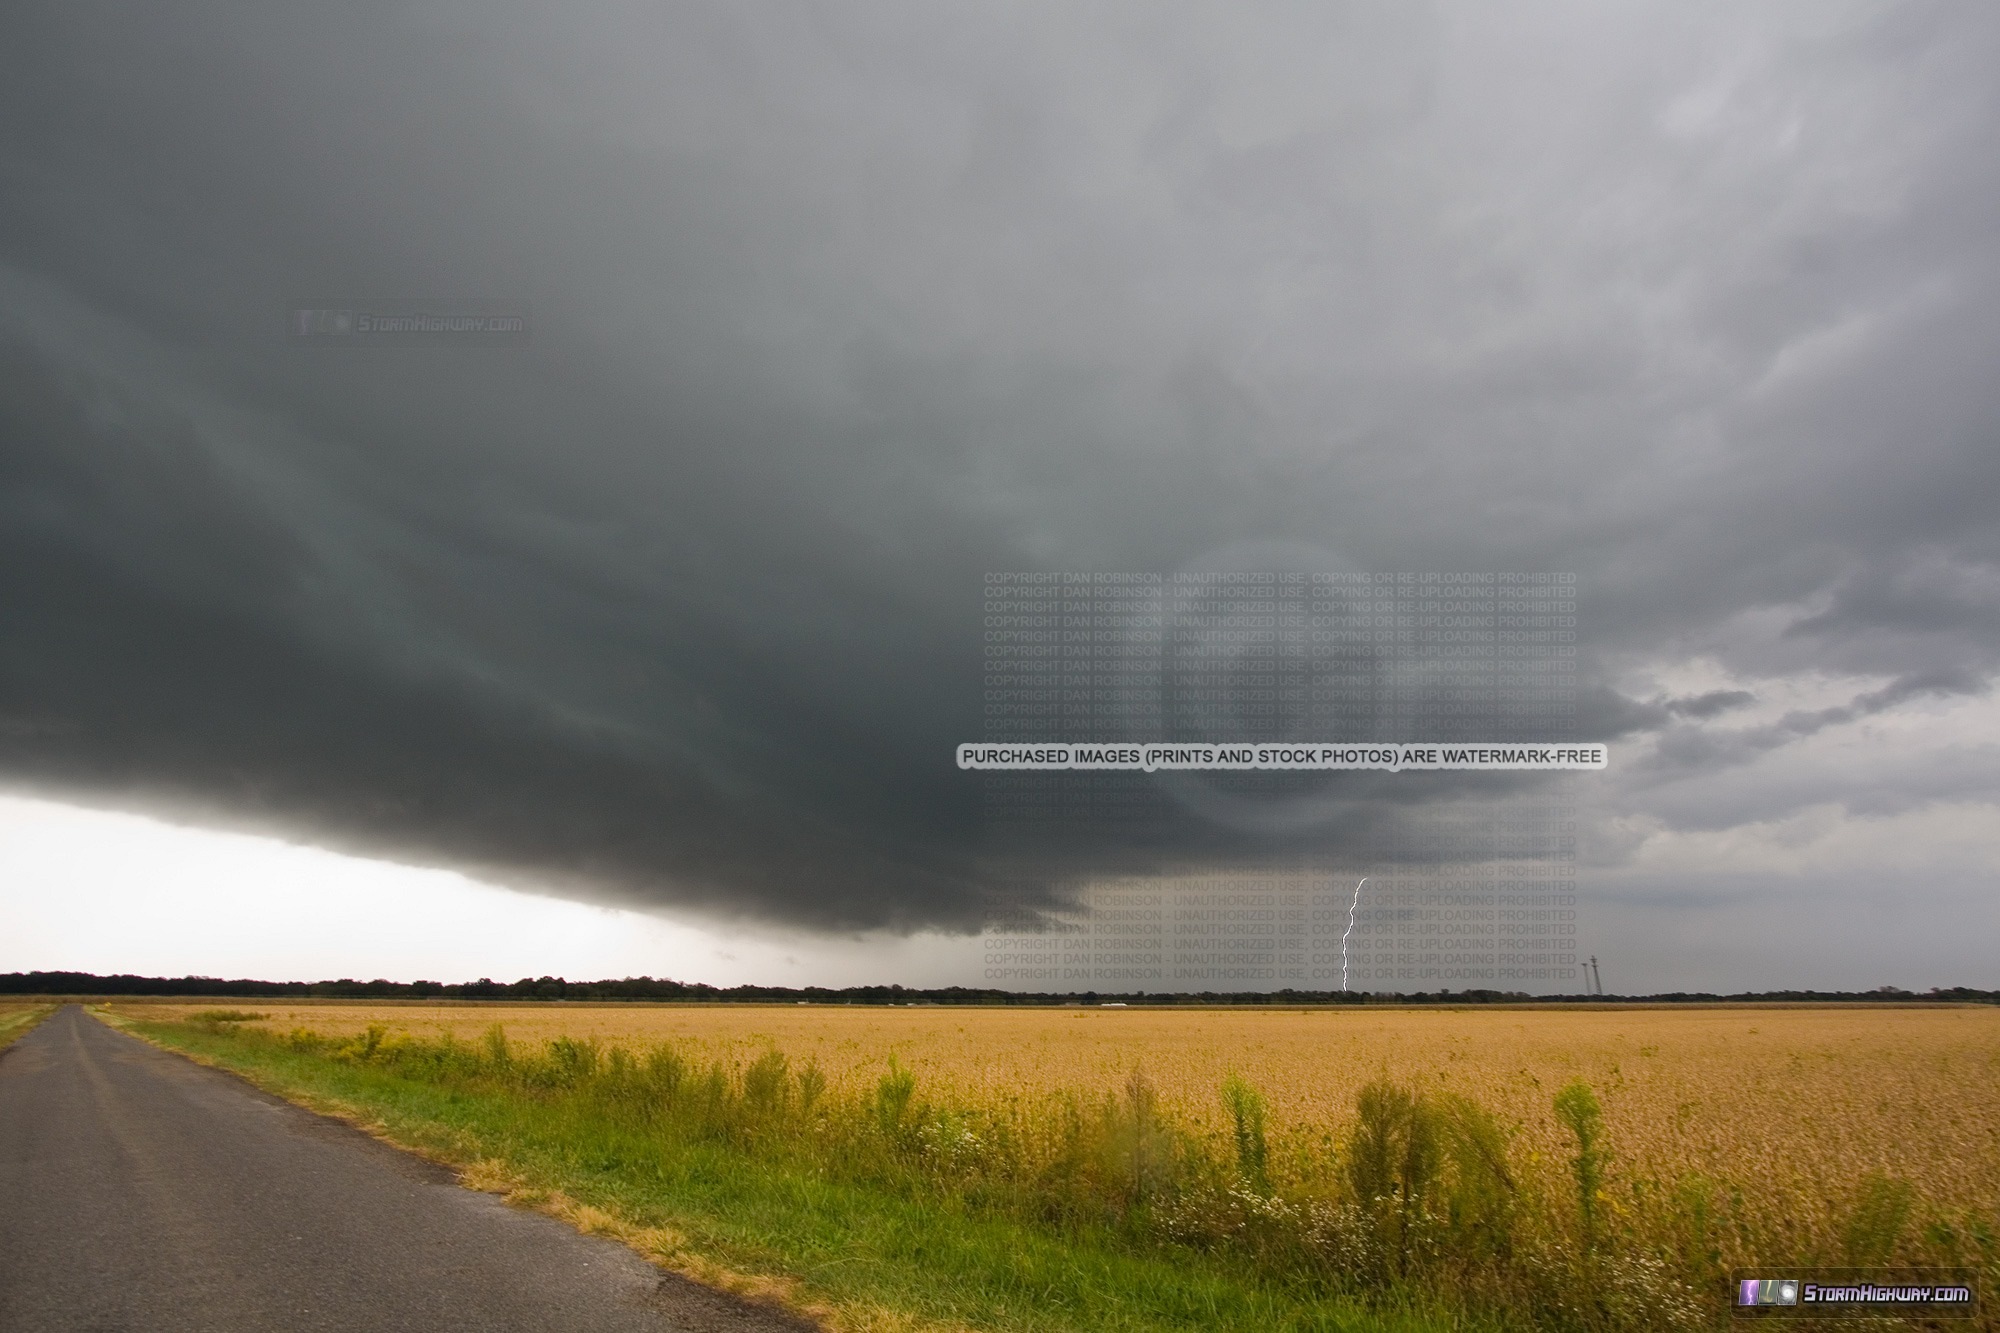 Elevated supercell near Mascoutah, IL - October 2, 2014